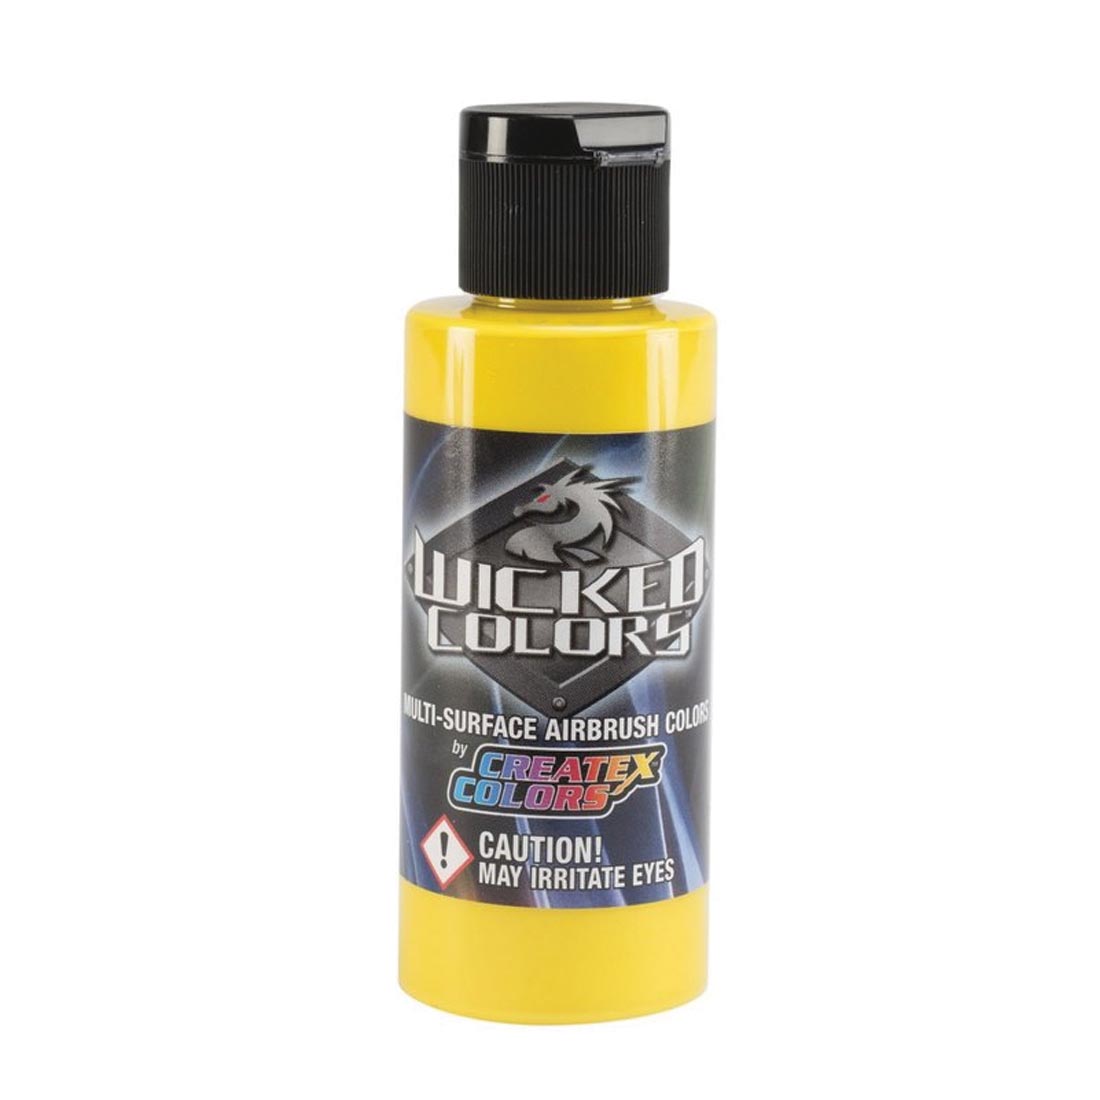 Bottle of Yellow Createx Wicked Colors Airbrush Paint